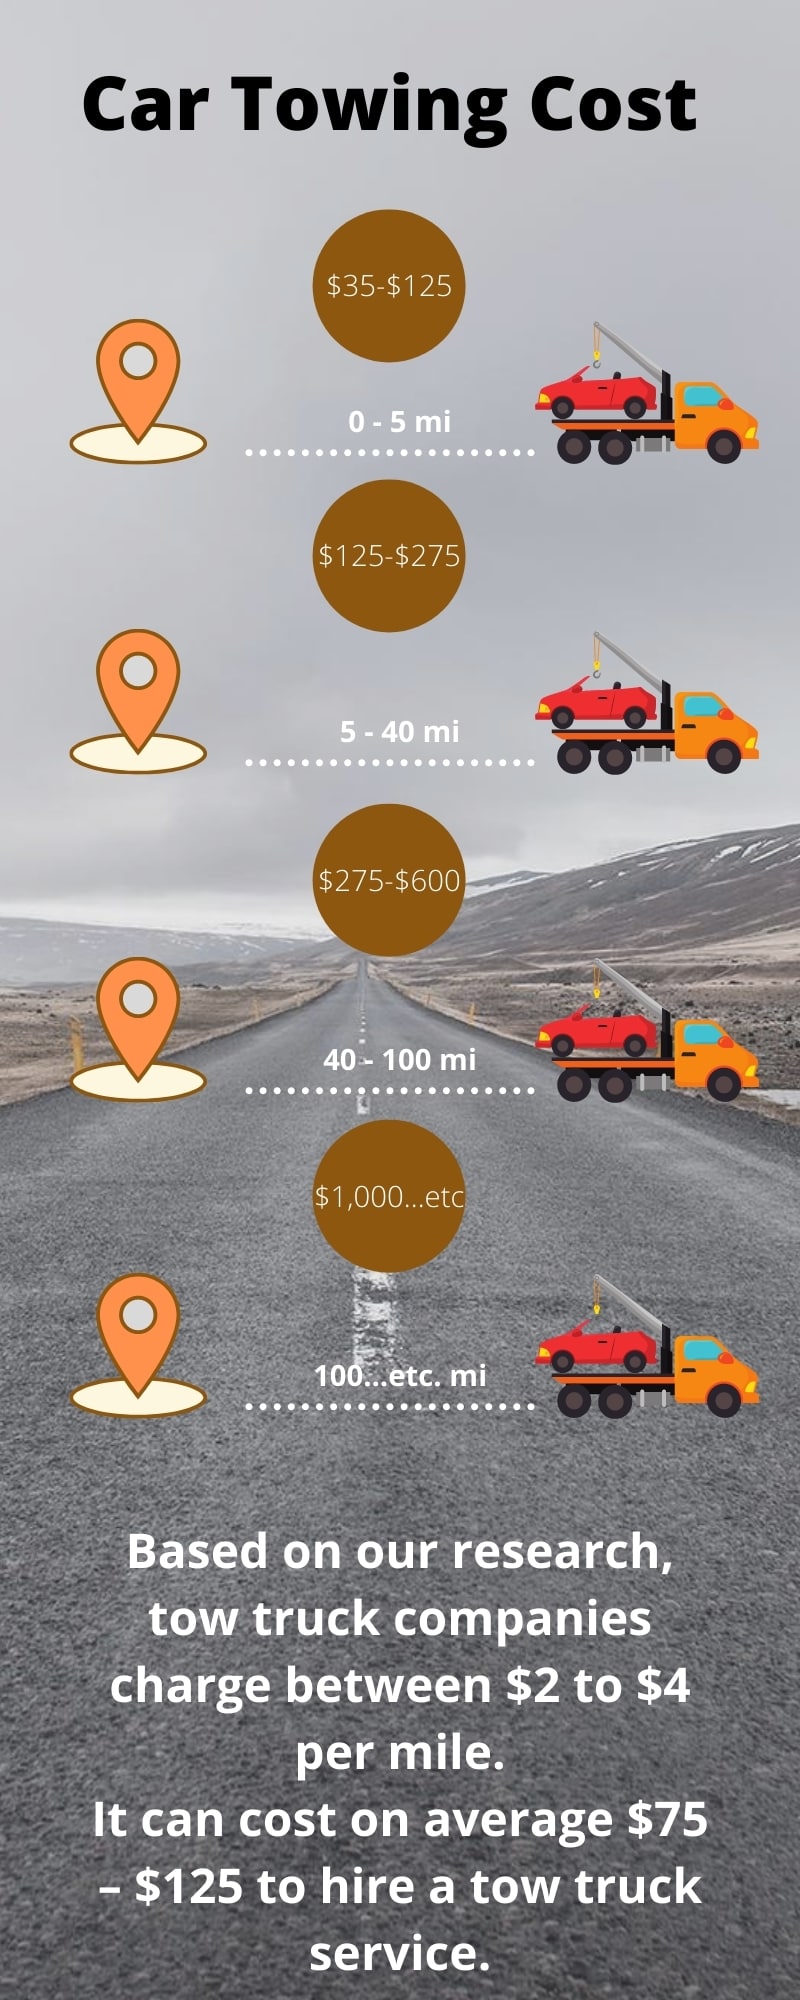 Car Towing Cost infographic